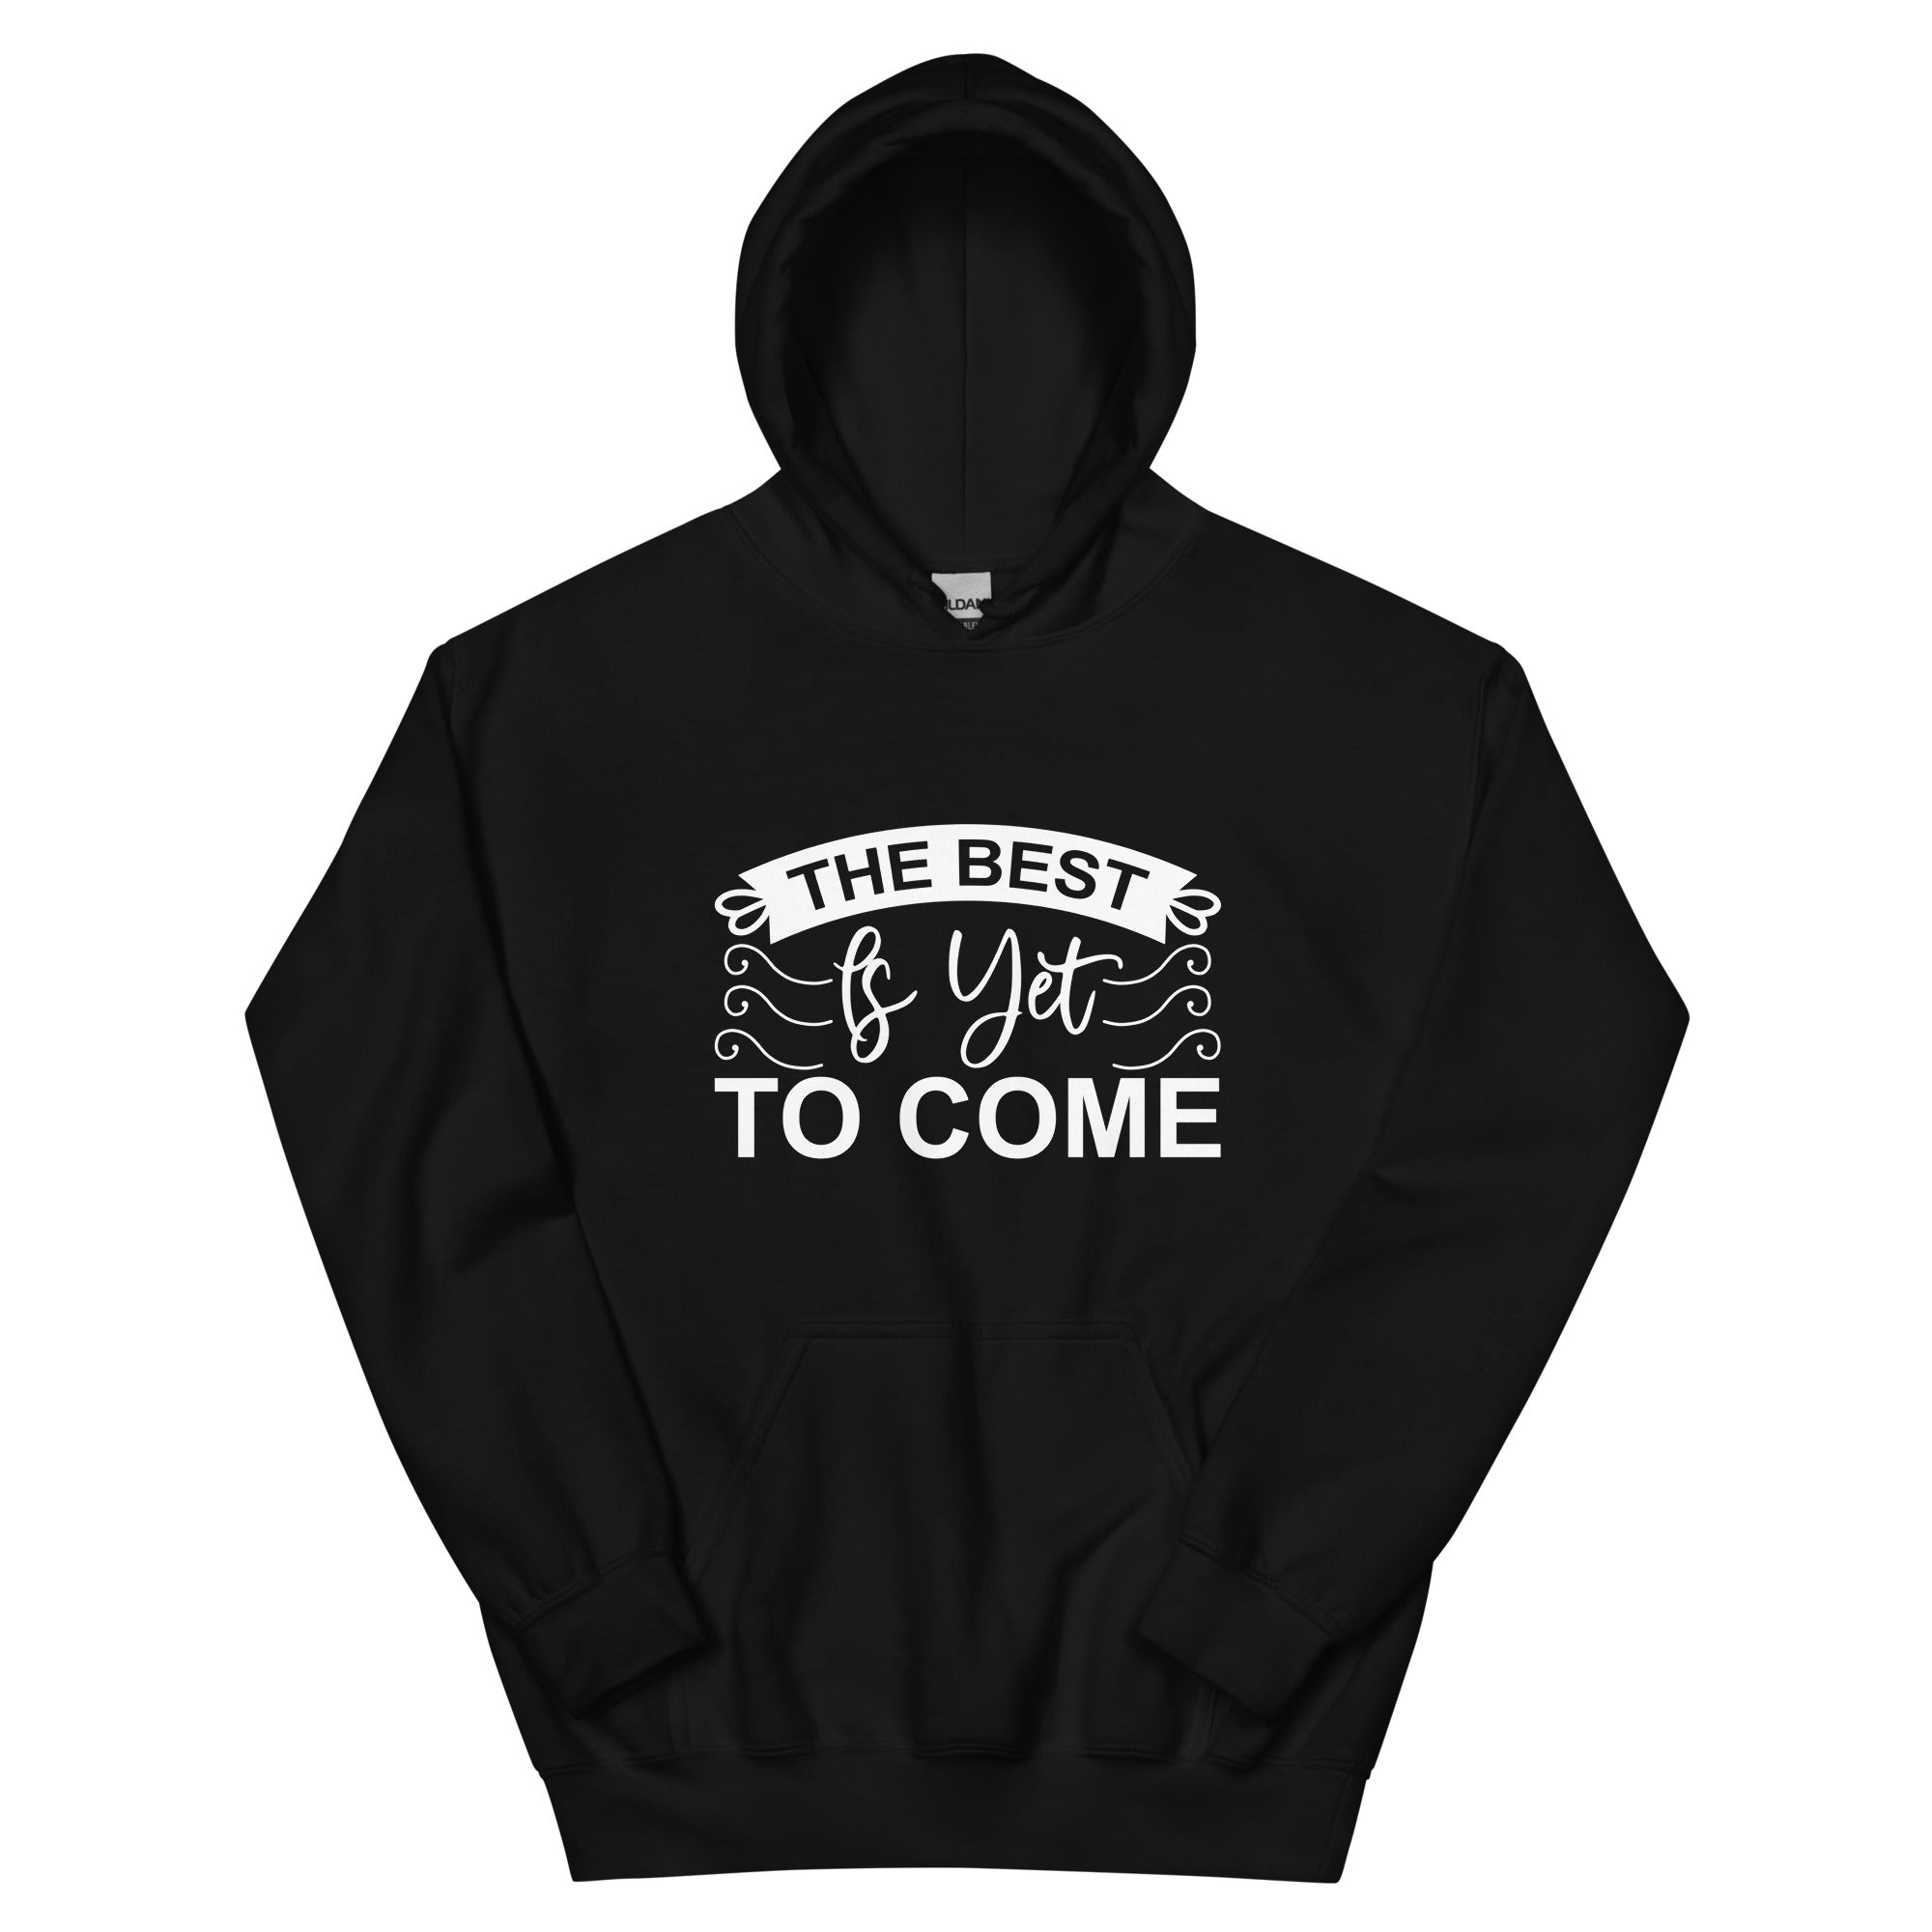 The Best Is Yet To Come - Unisex Hoodie